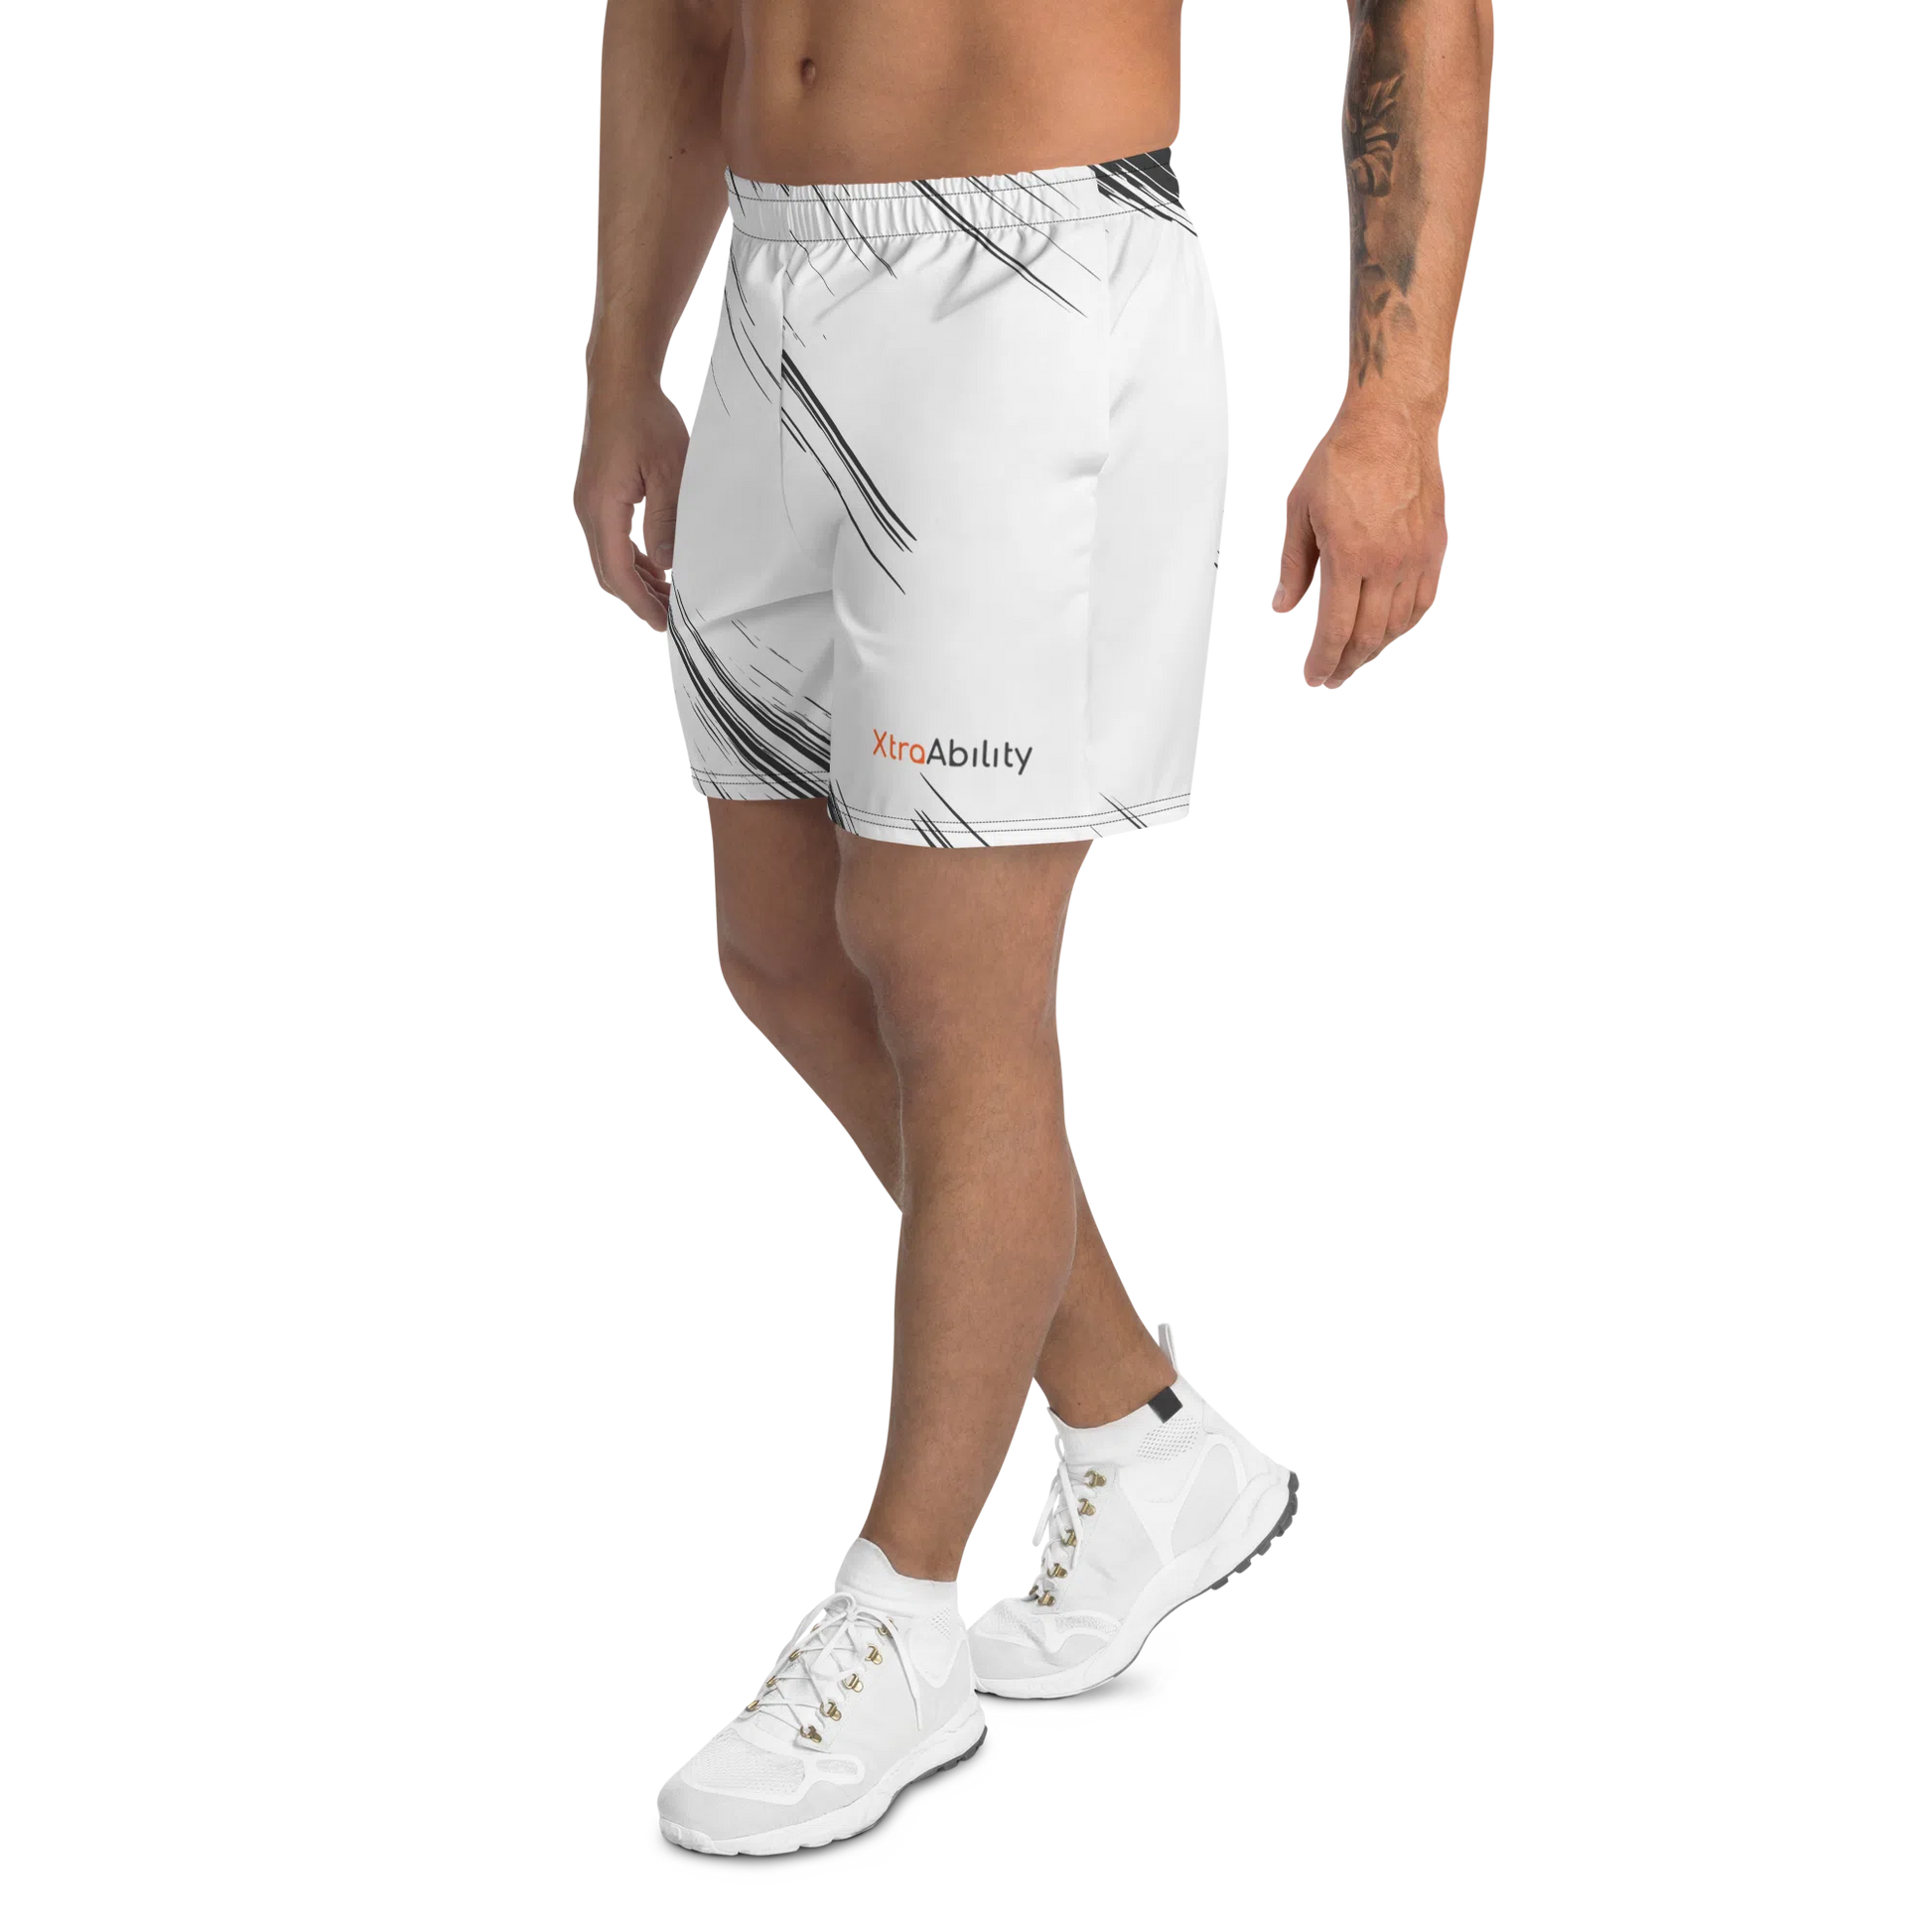 Black And White Men's Recycled Athletic Shorts